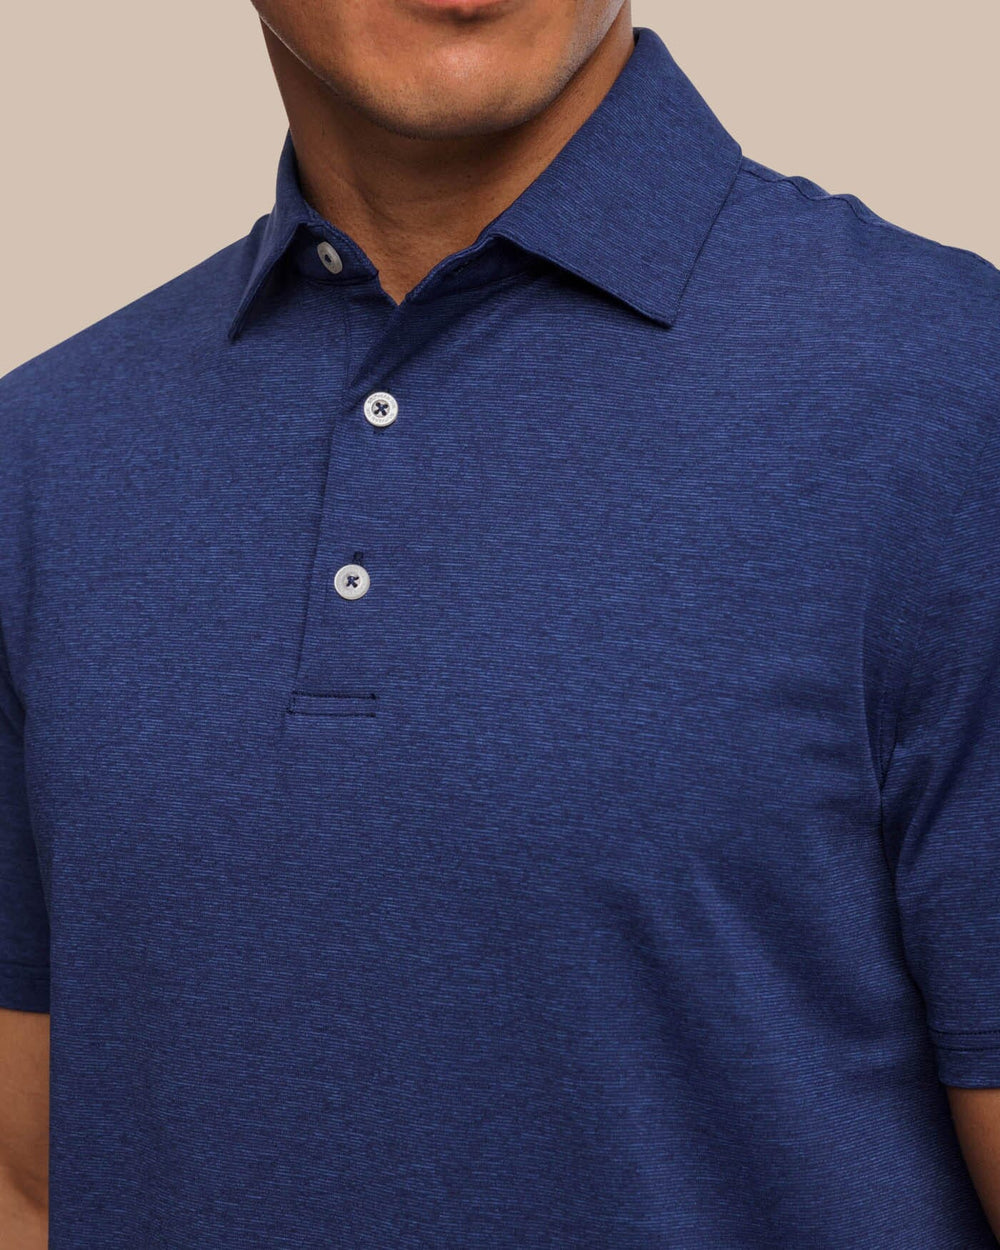 The detail view of the brrr°®-eeze Heather Performance Polo Shirt by Southern Tide - Heather Nautical Navy